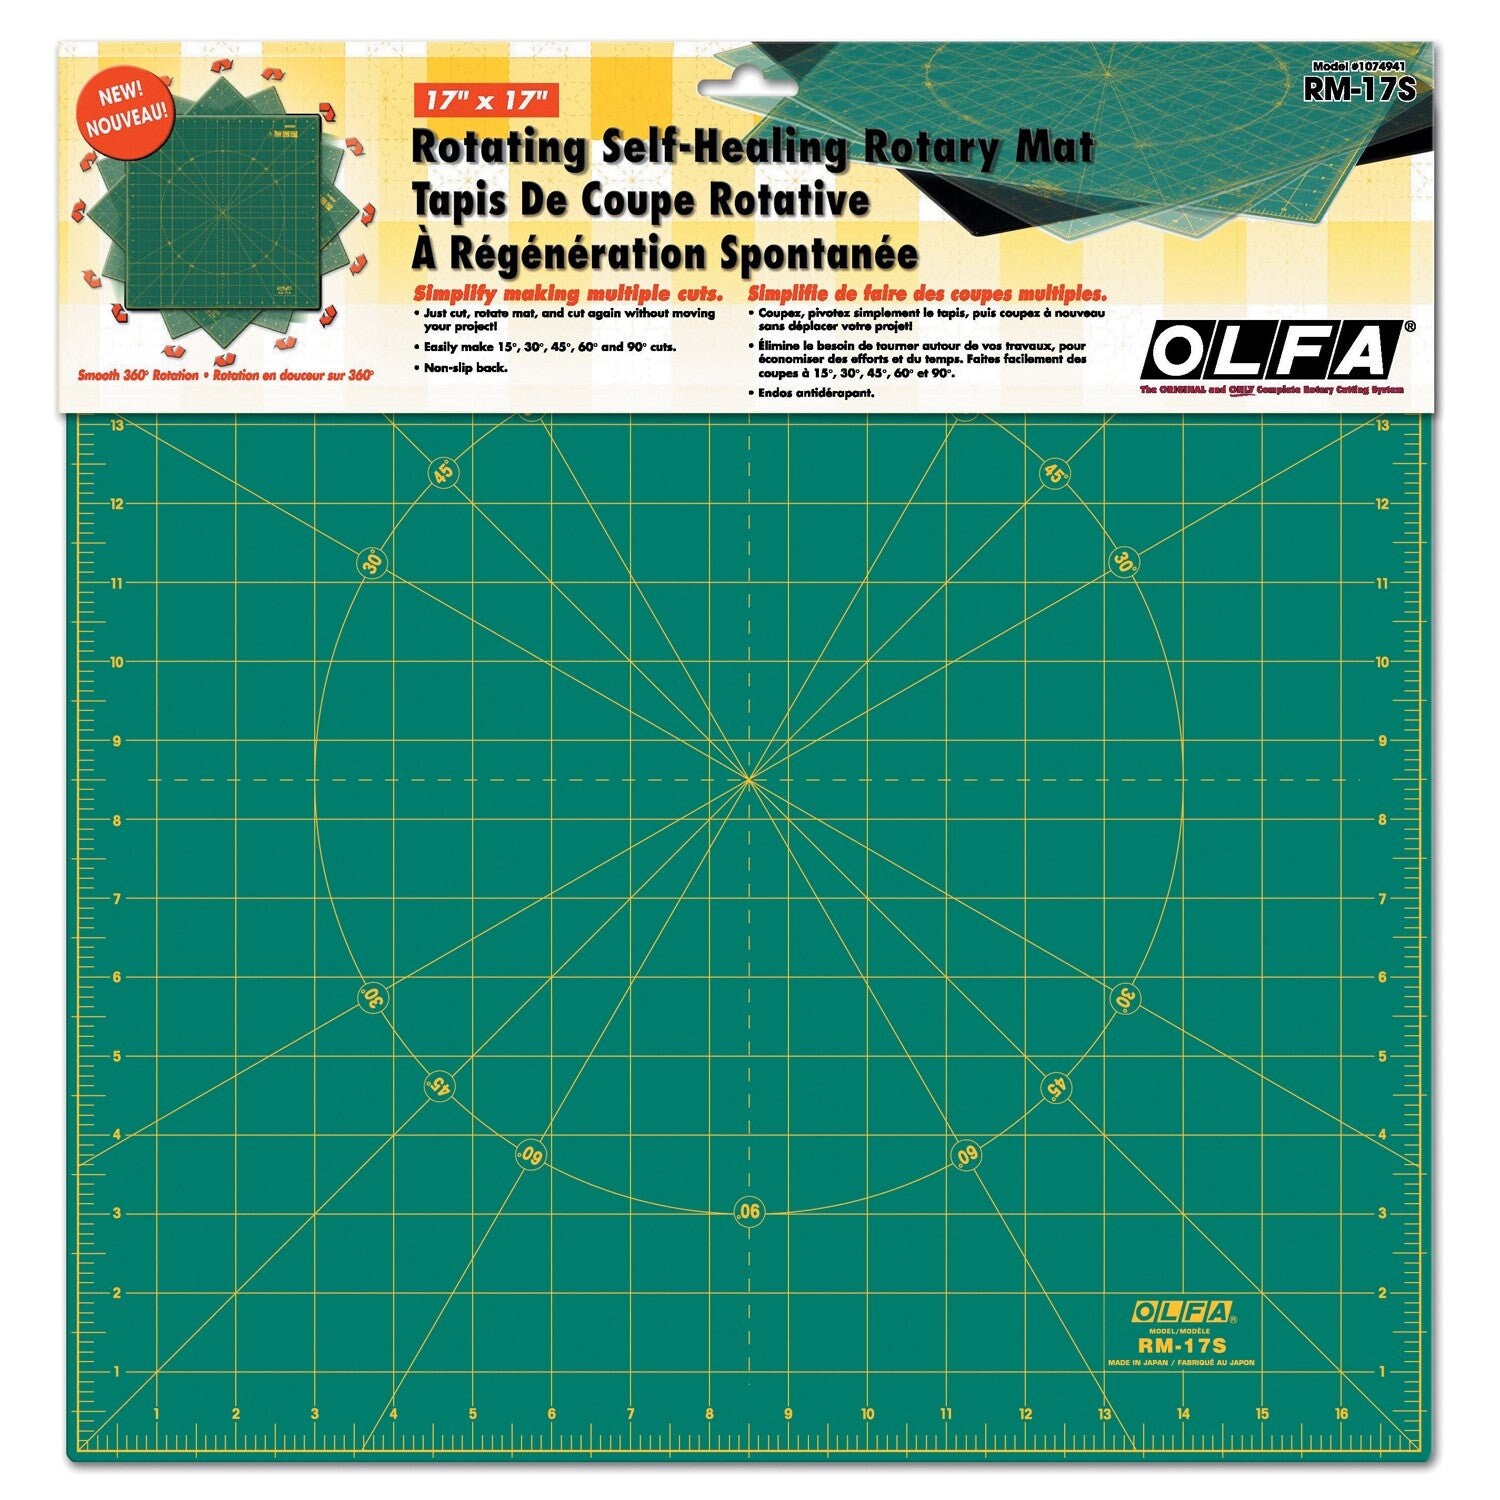 June Tailor Mini Rotary Cutting Mat 5, 1/8 Increments, Superior  Durability,gridded,non Skid,textured,handle,quilting, Made in USA 